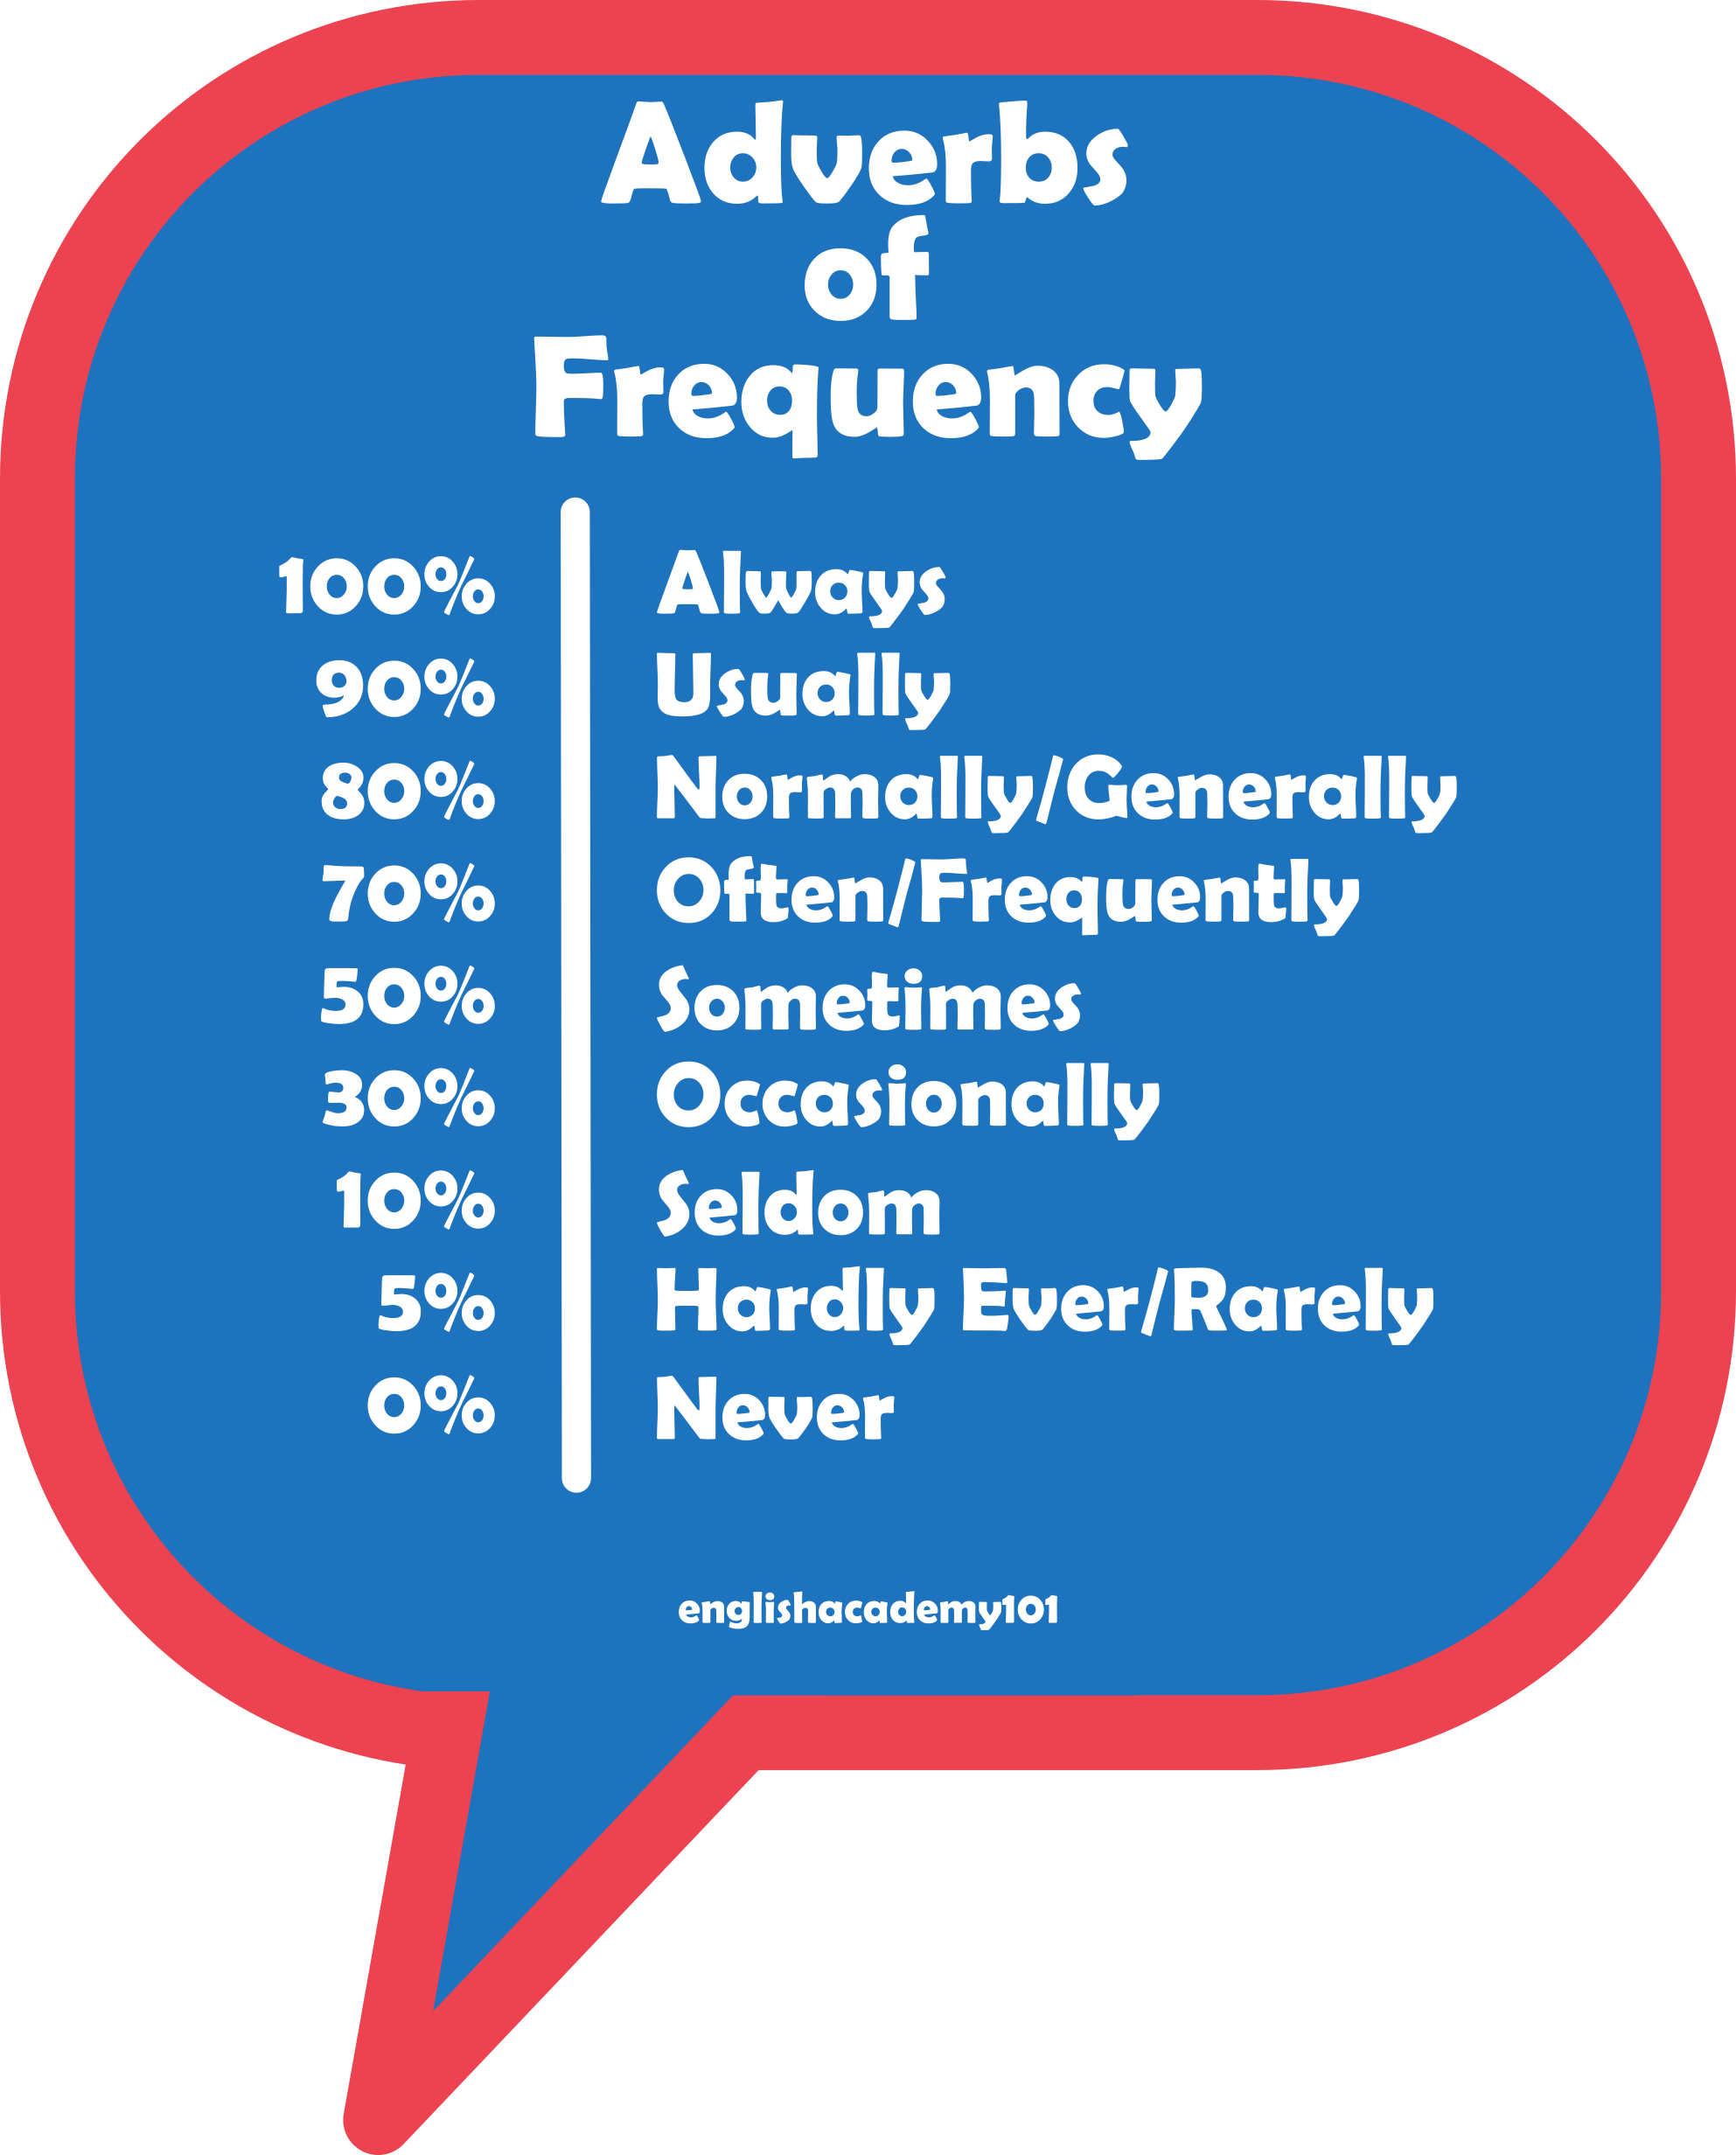 adverbs-of-frequency-in-english-englishacademy101